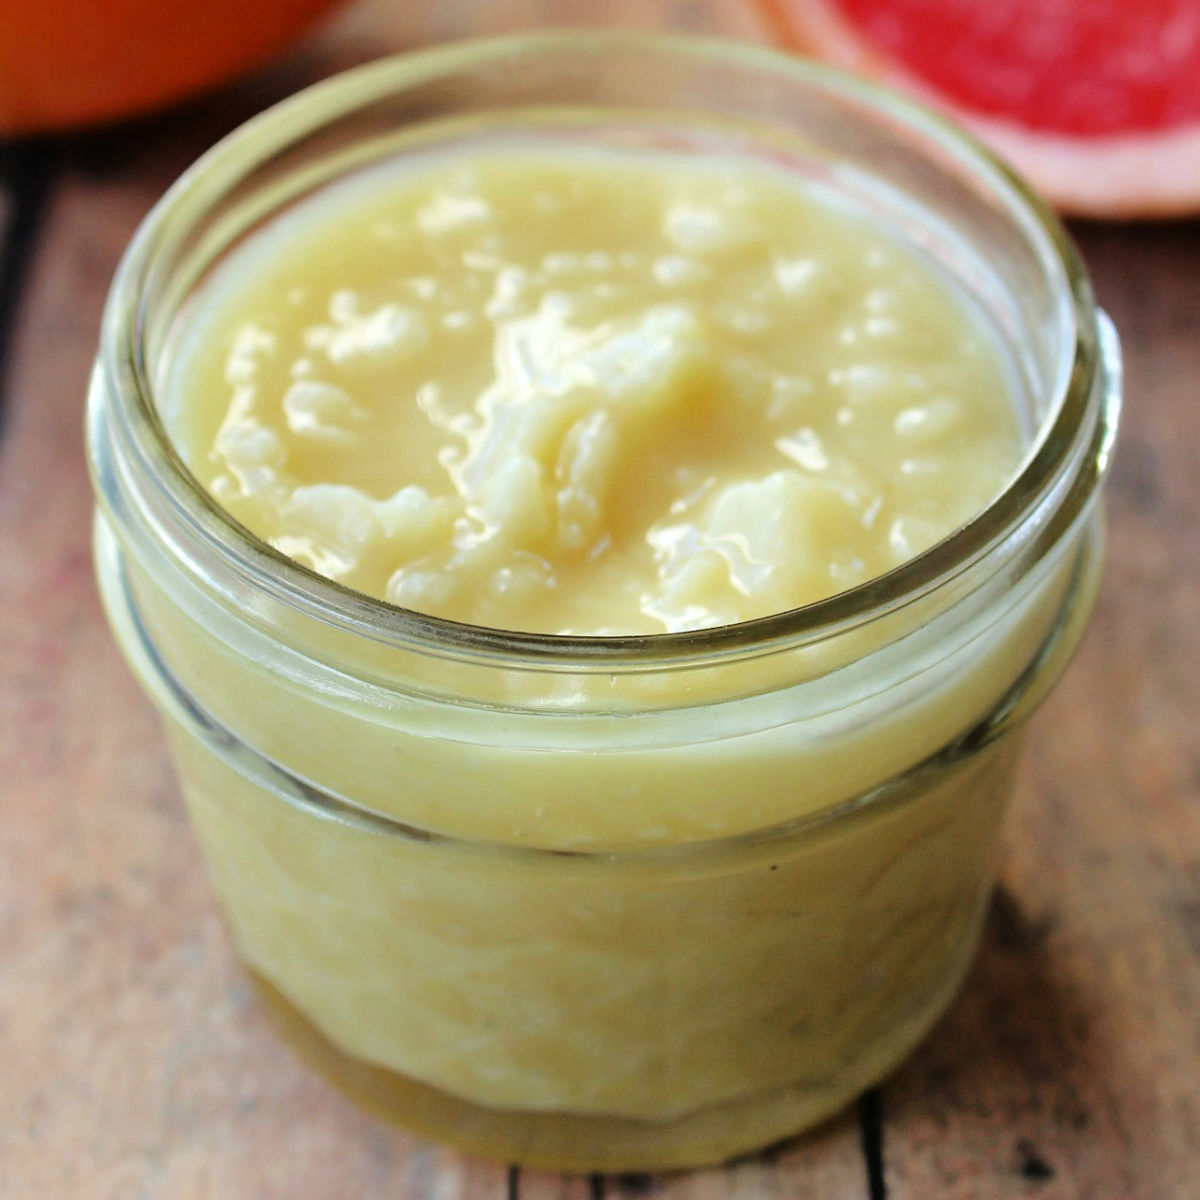 DIY cellulite cream in a clear glass mason jar on a brown table with a slice of grapefruit behind it